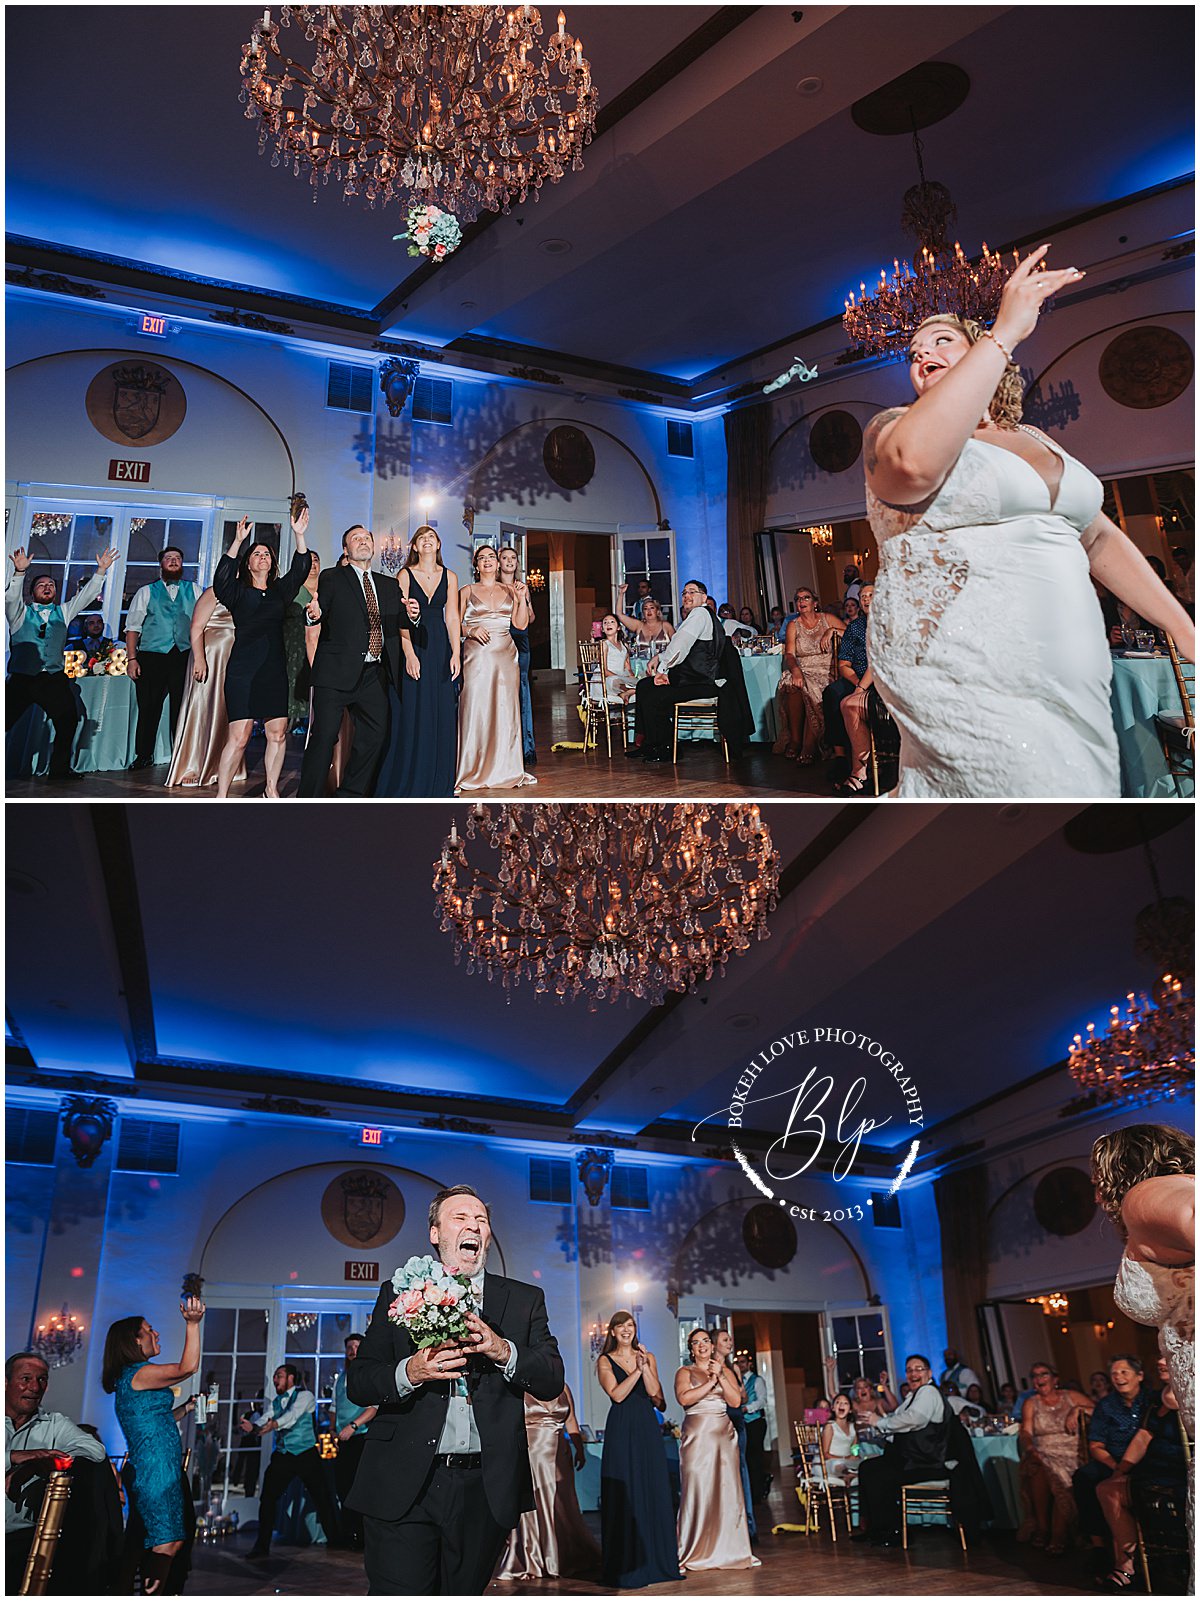 Photography by Bokeh Love Photography, wedding reception photos at the flanders hotel in ocean city, bouquet toss